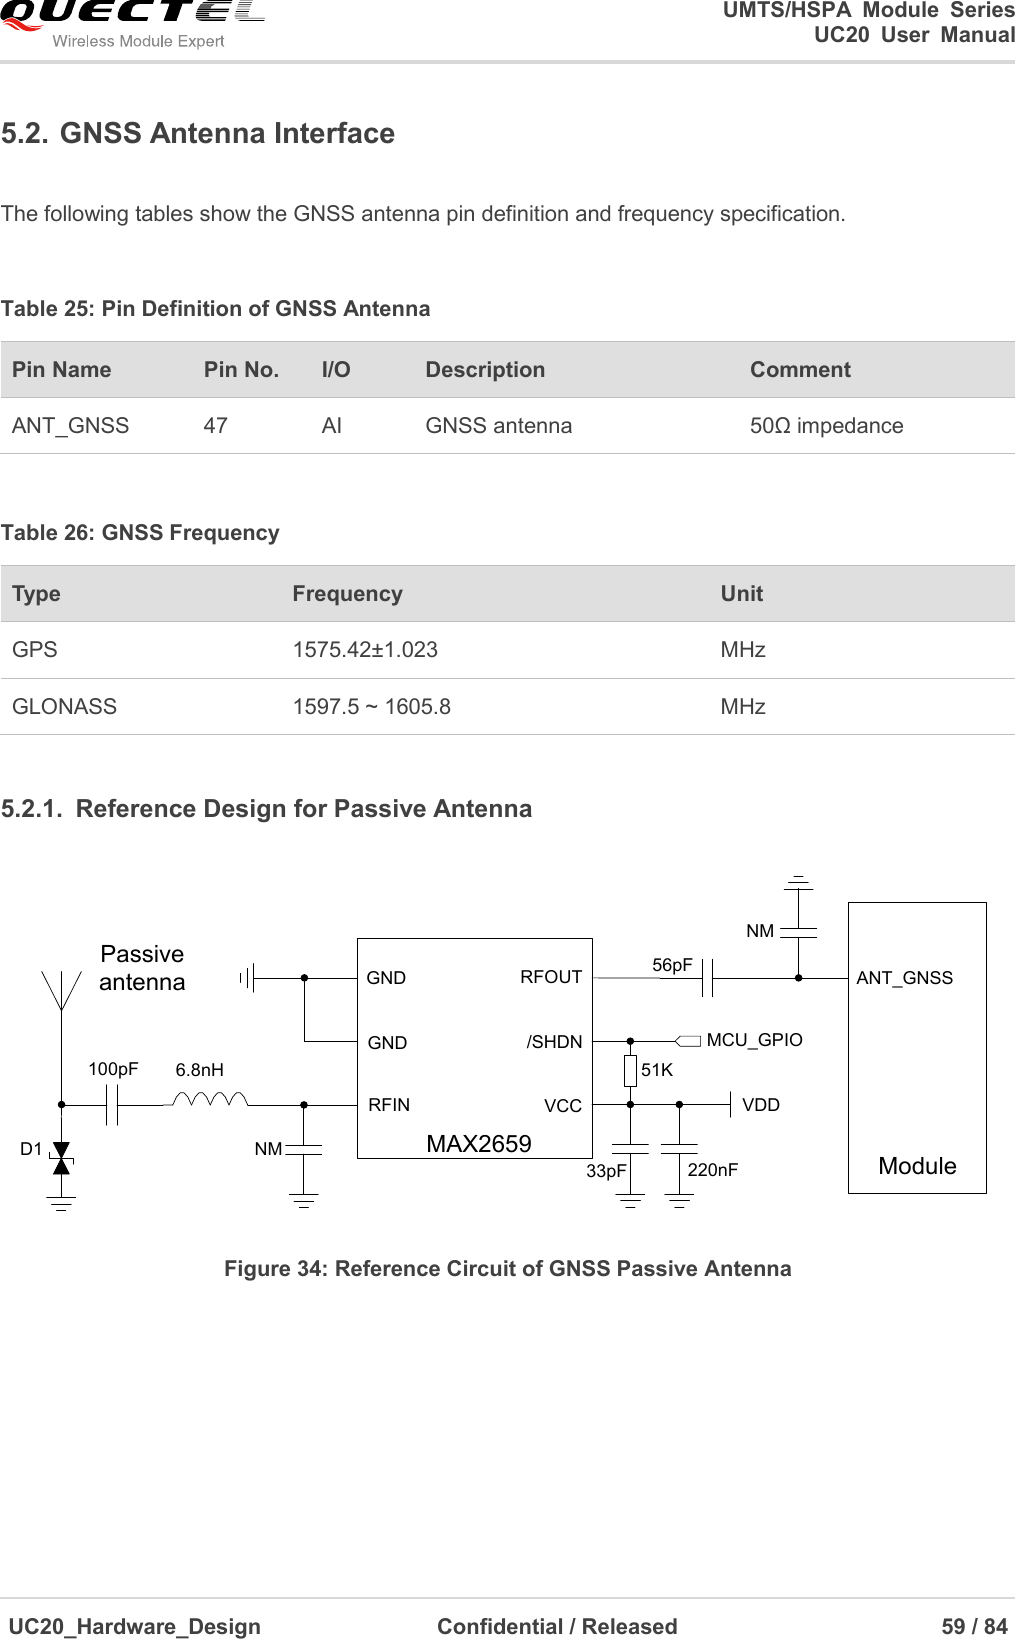                                                                                                                                               UMTS/HSPA  Module  Series                                                                 UC20  User  Manual  UC20_Hardware_Design                  Confidential / Released                            59 / 84     5.2. GNSS Antenna Interface  The following tables show the GNSS antenna pin definition and frequency specification.  Table 25: Pin Definition of GNSS Antenna Pin Name   Pin No. I/O Description   Comment ANT_GNSS 47 AI GNSS antenna 50Ω impedance  Table 26: GNSS Frequency Type Frequency Unit GPS 1575.42±1.023 MHz GLONASS 1597.5 ~ 1605.8 MHz  5.2.1.  Reference Design for Passive Antenna PassiveantennaMAX2659ModuleANT_GNSS/SHDNGNDRFINGND RFOUTVCC VDDMCU_GPIO100pF 6.8nH220nF33pF51KNMNM56pFD1 Figure 34: Reference Circuit of GNSS Passive Antenna    